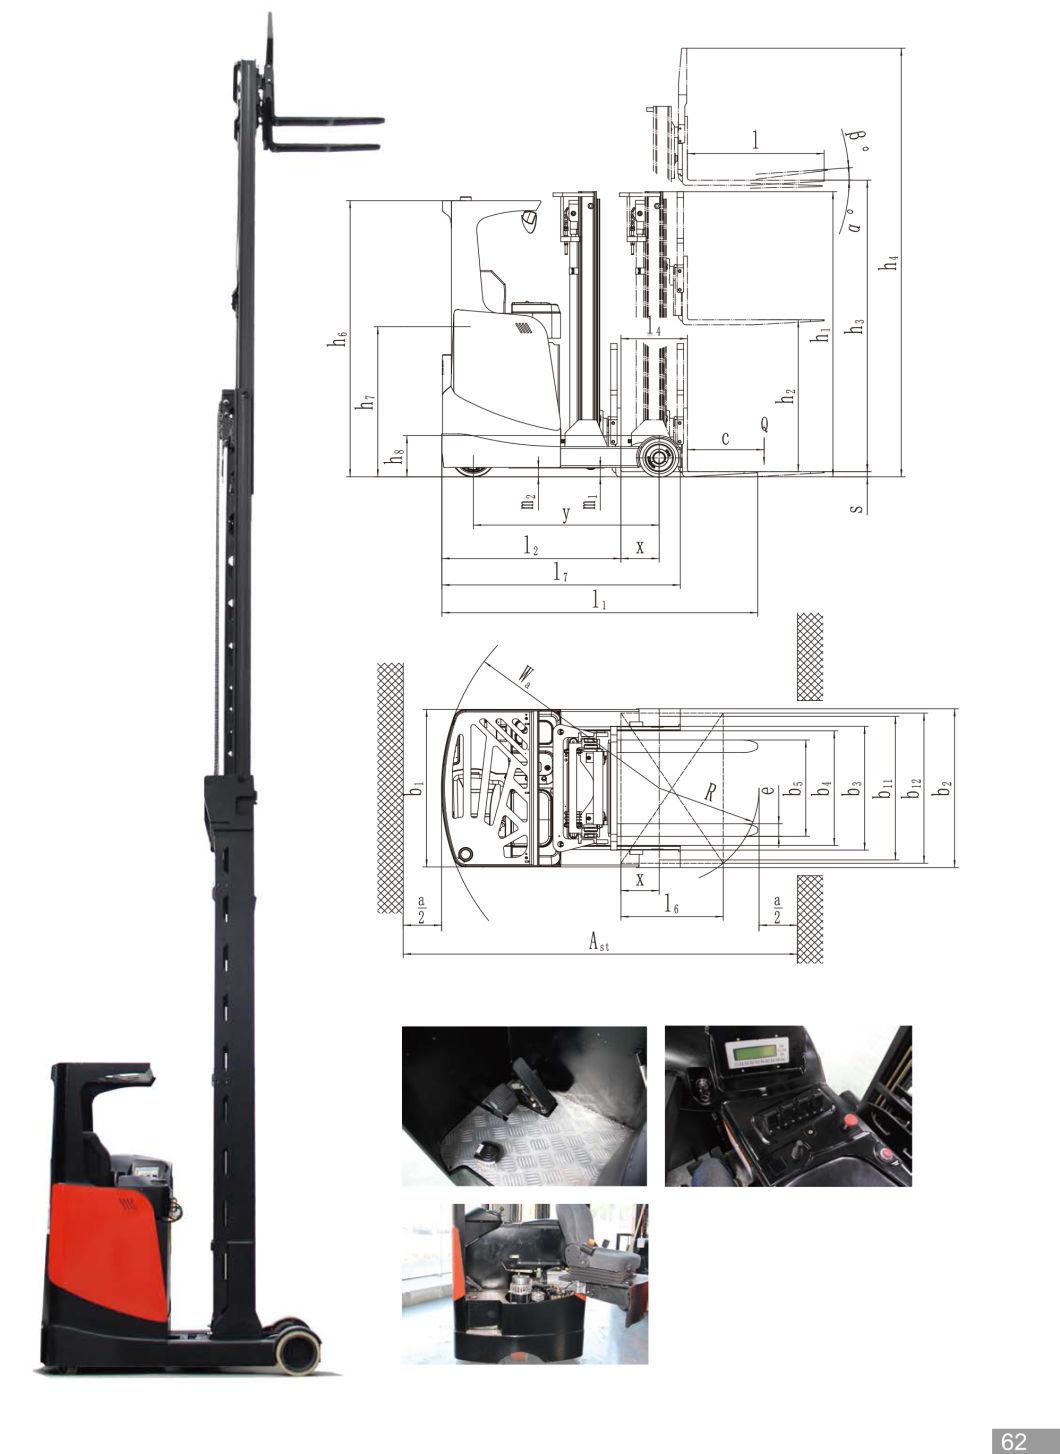 6000mm 6500mm 7000mm 7500mm 8000mm 8500mm 9000mm 9500mm 10000mm Lift Height Lift Electric Reach Stacker Seated Reach Forklift